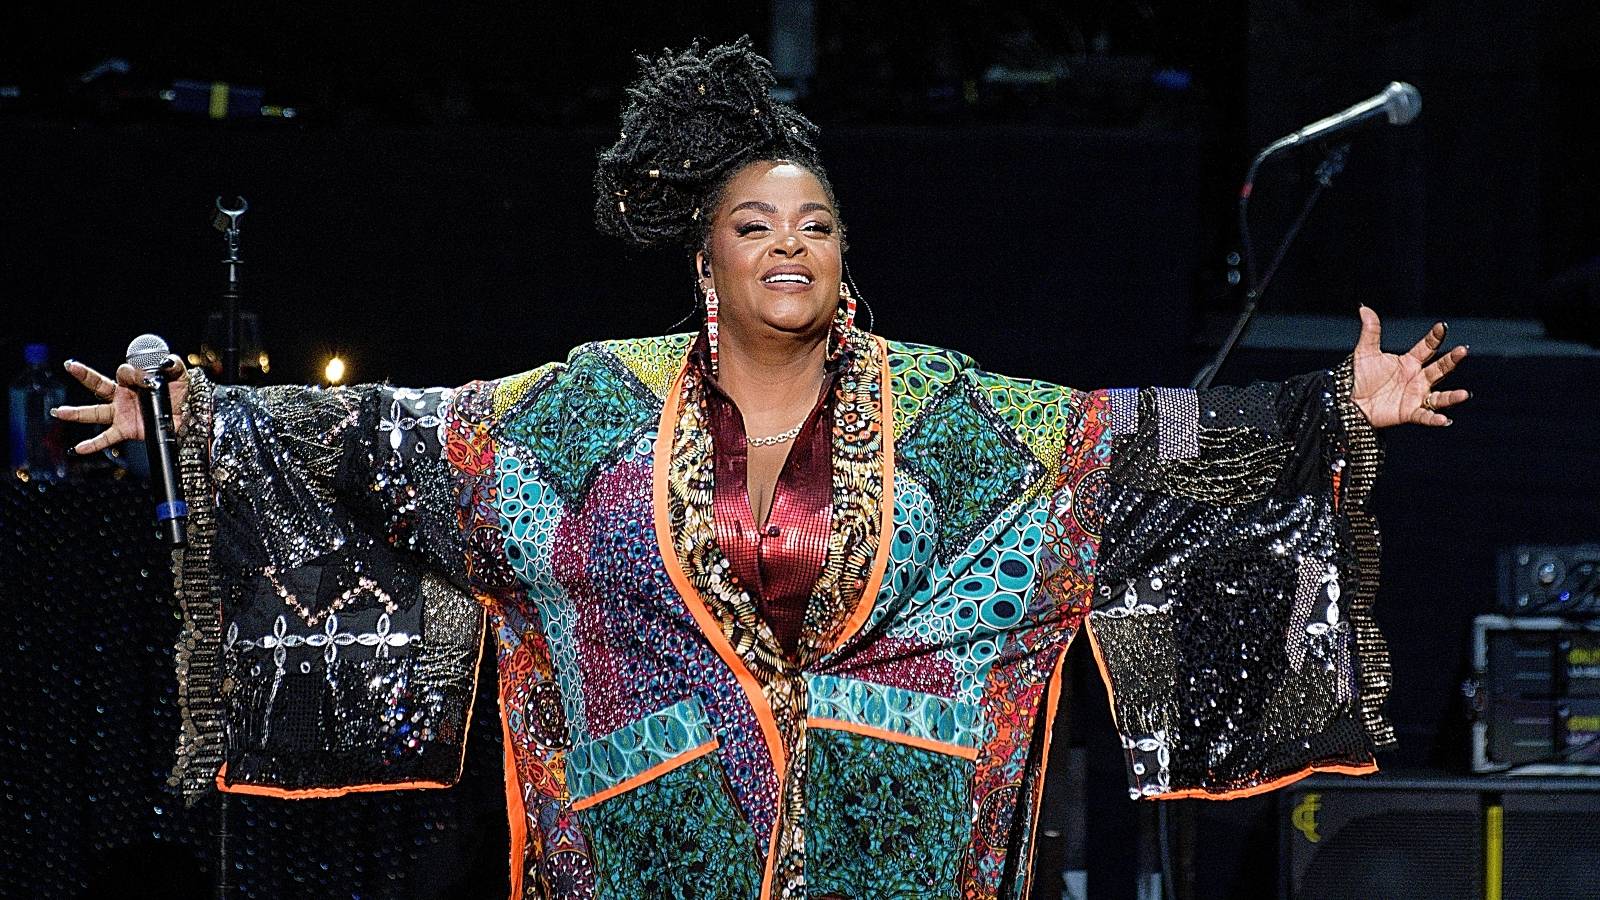   Singer Jill Scott performs on stage during the "Who is Jill Scott?" tour at Smart Financial Centre on June 16, 2023 in Sugar Land, Texas.  